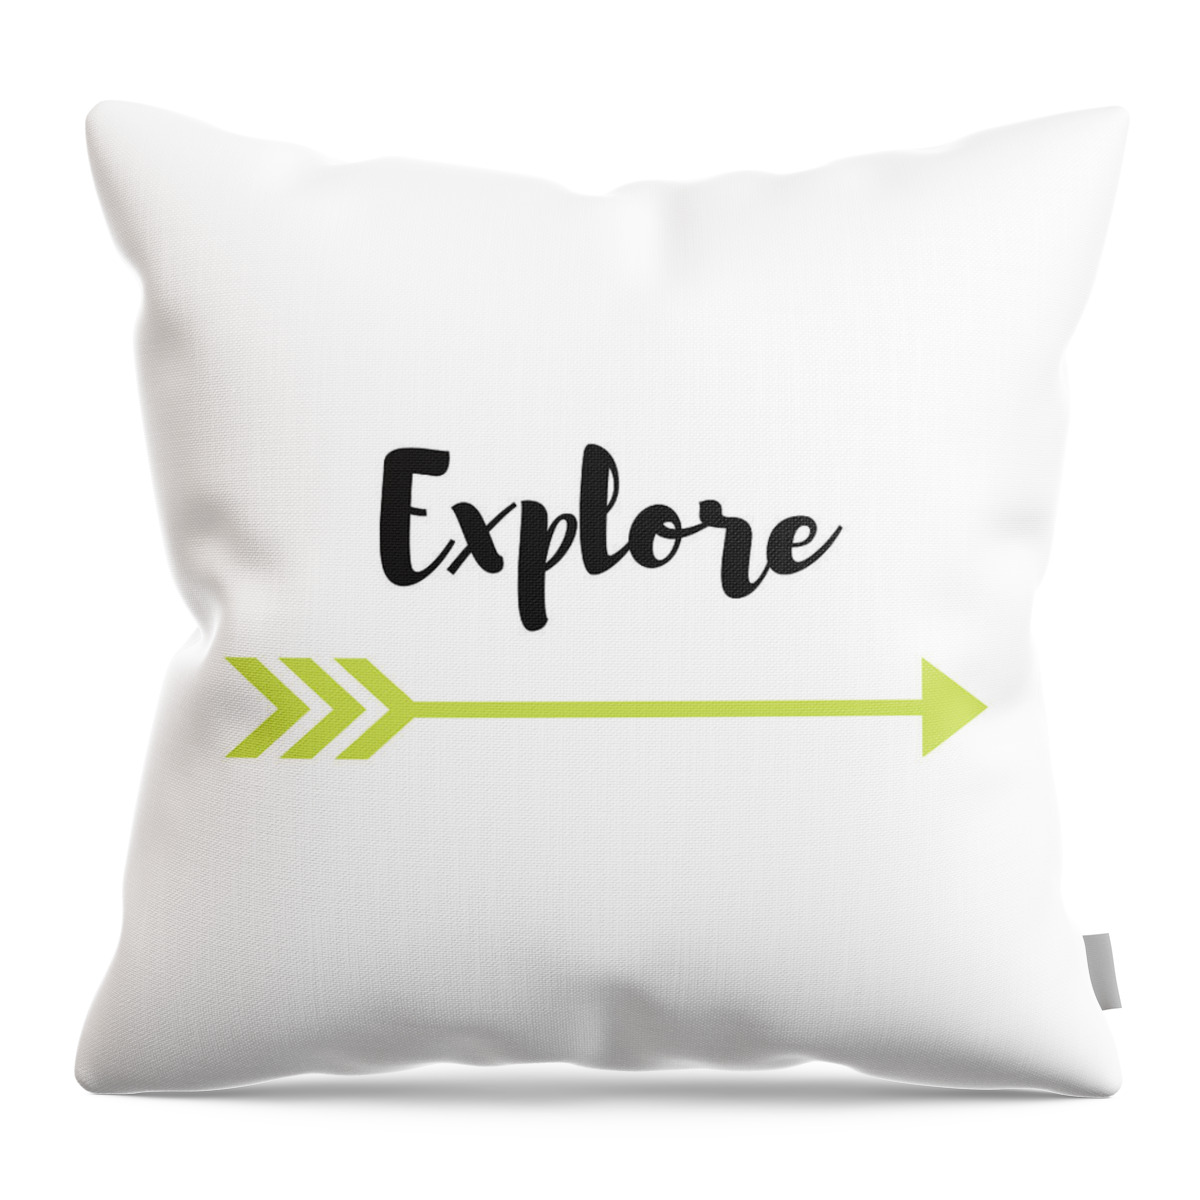 Explore Throw Pillow featuring the digital art Explore by Rosemary Nagorner